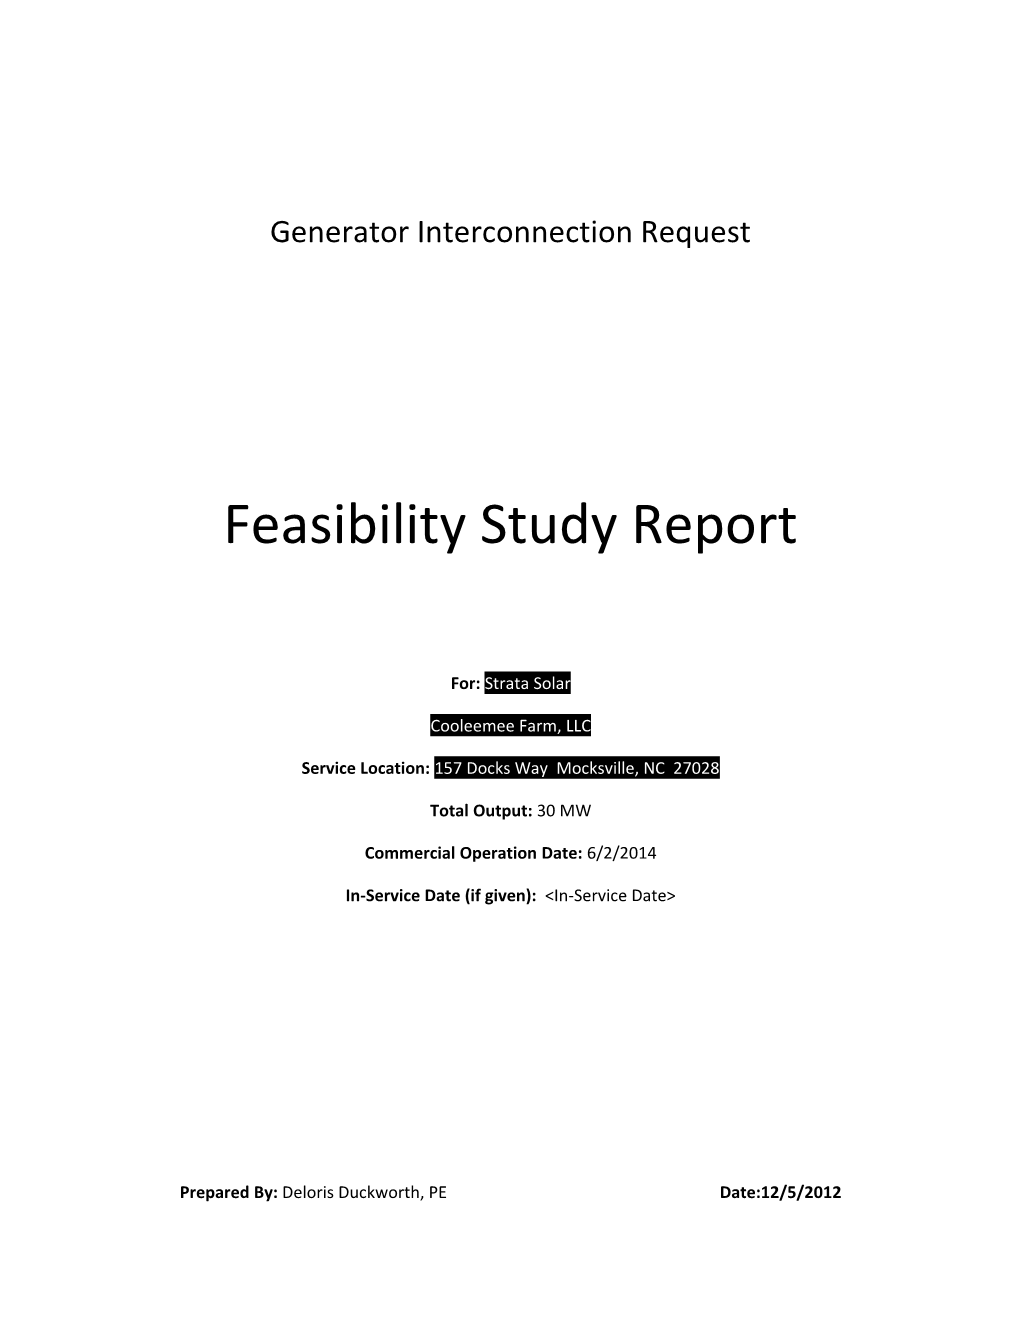 Feasibility Study Report s1